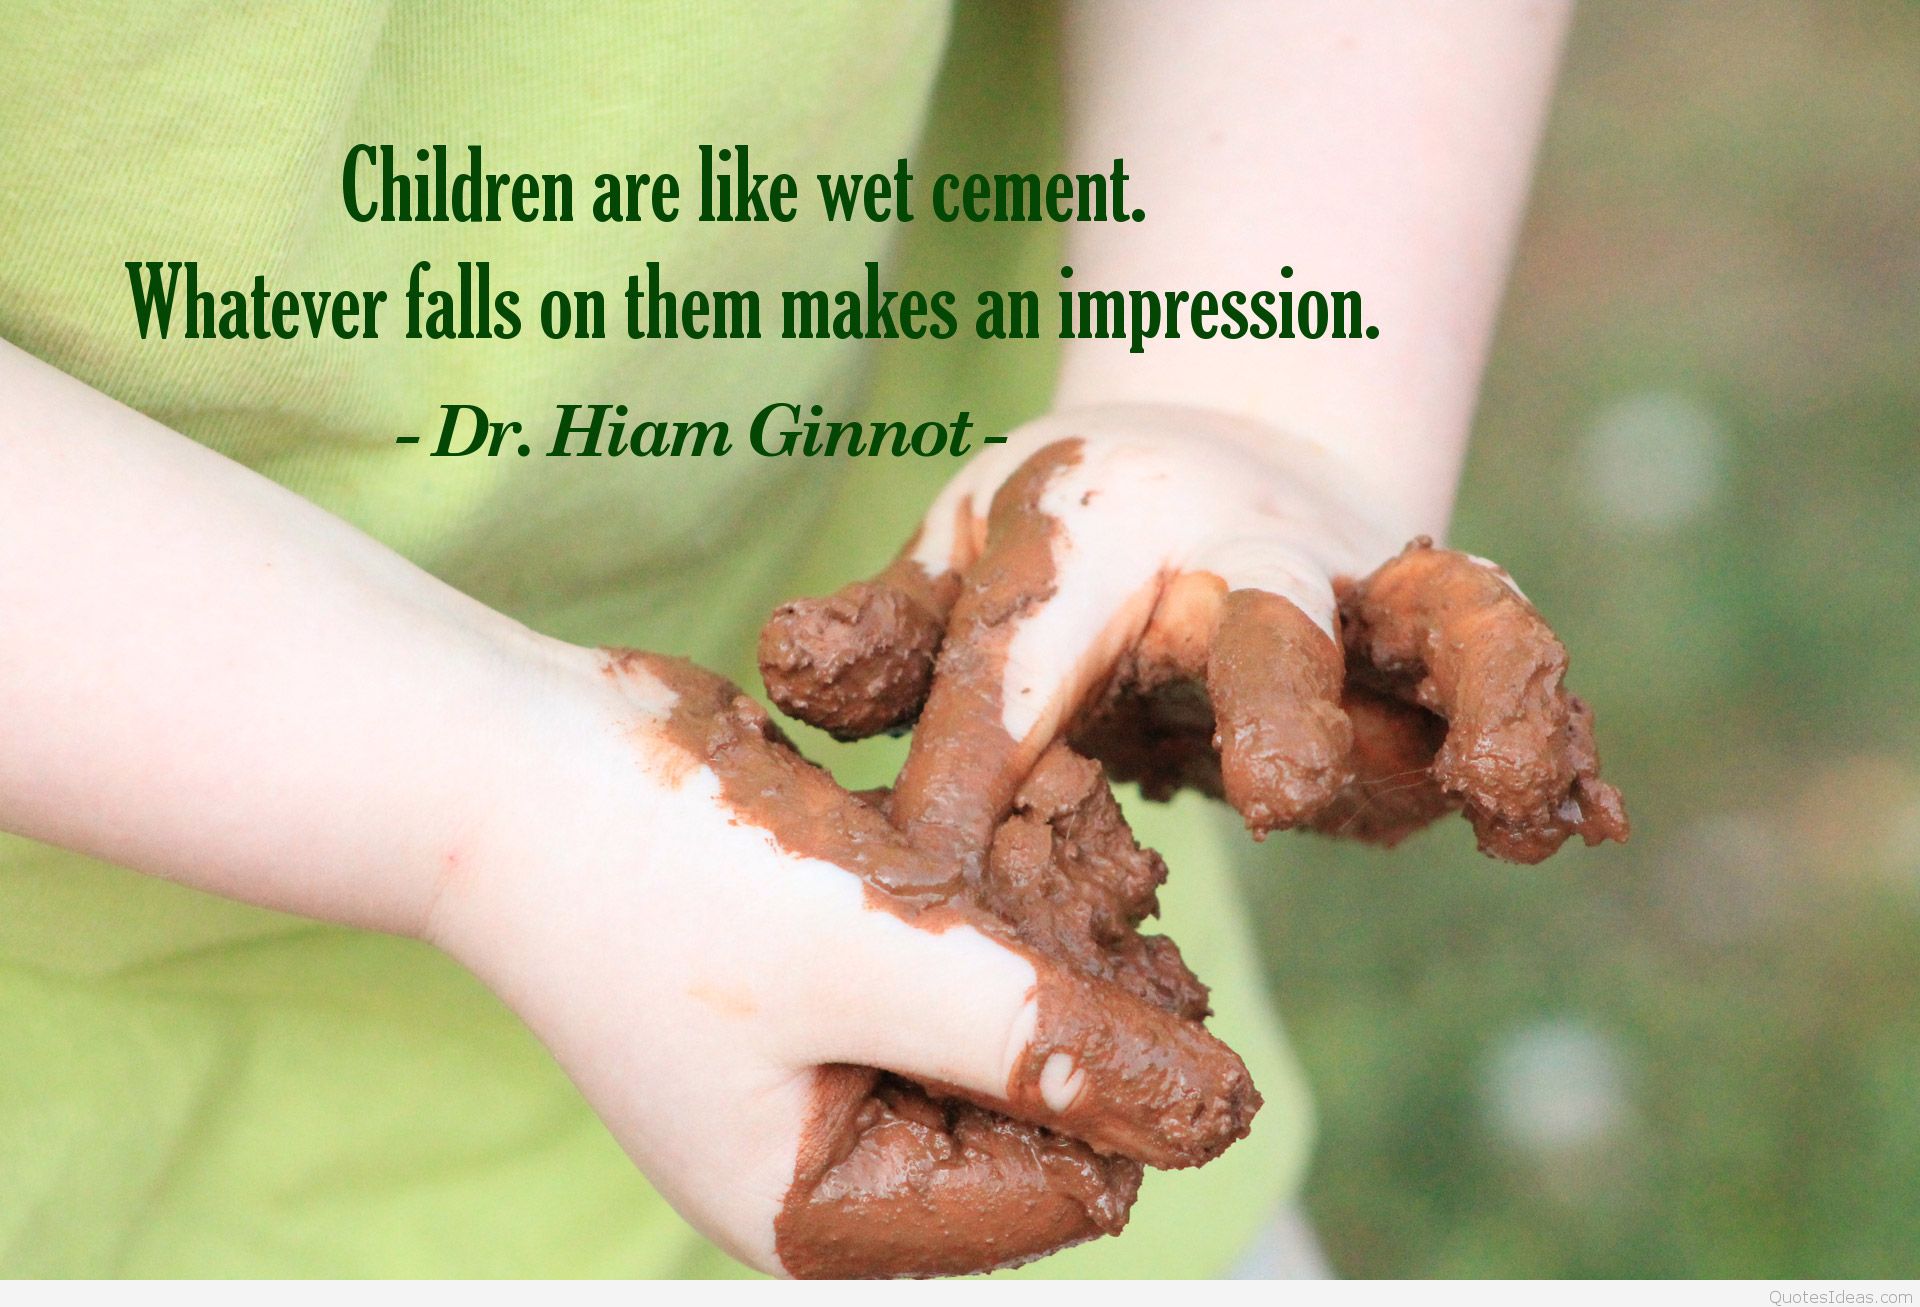 Children are wet like cement.whatever falls on them makes an impression.